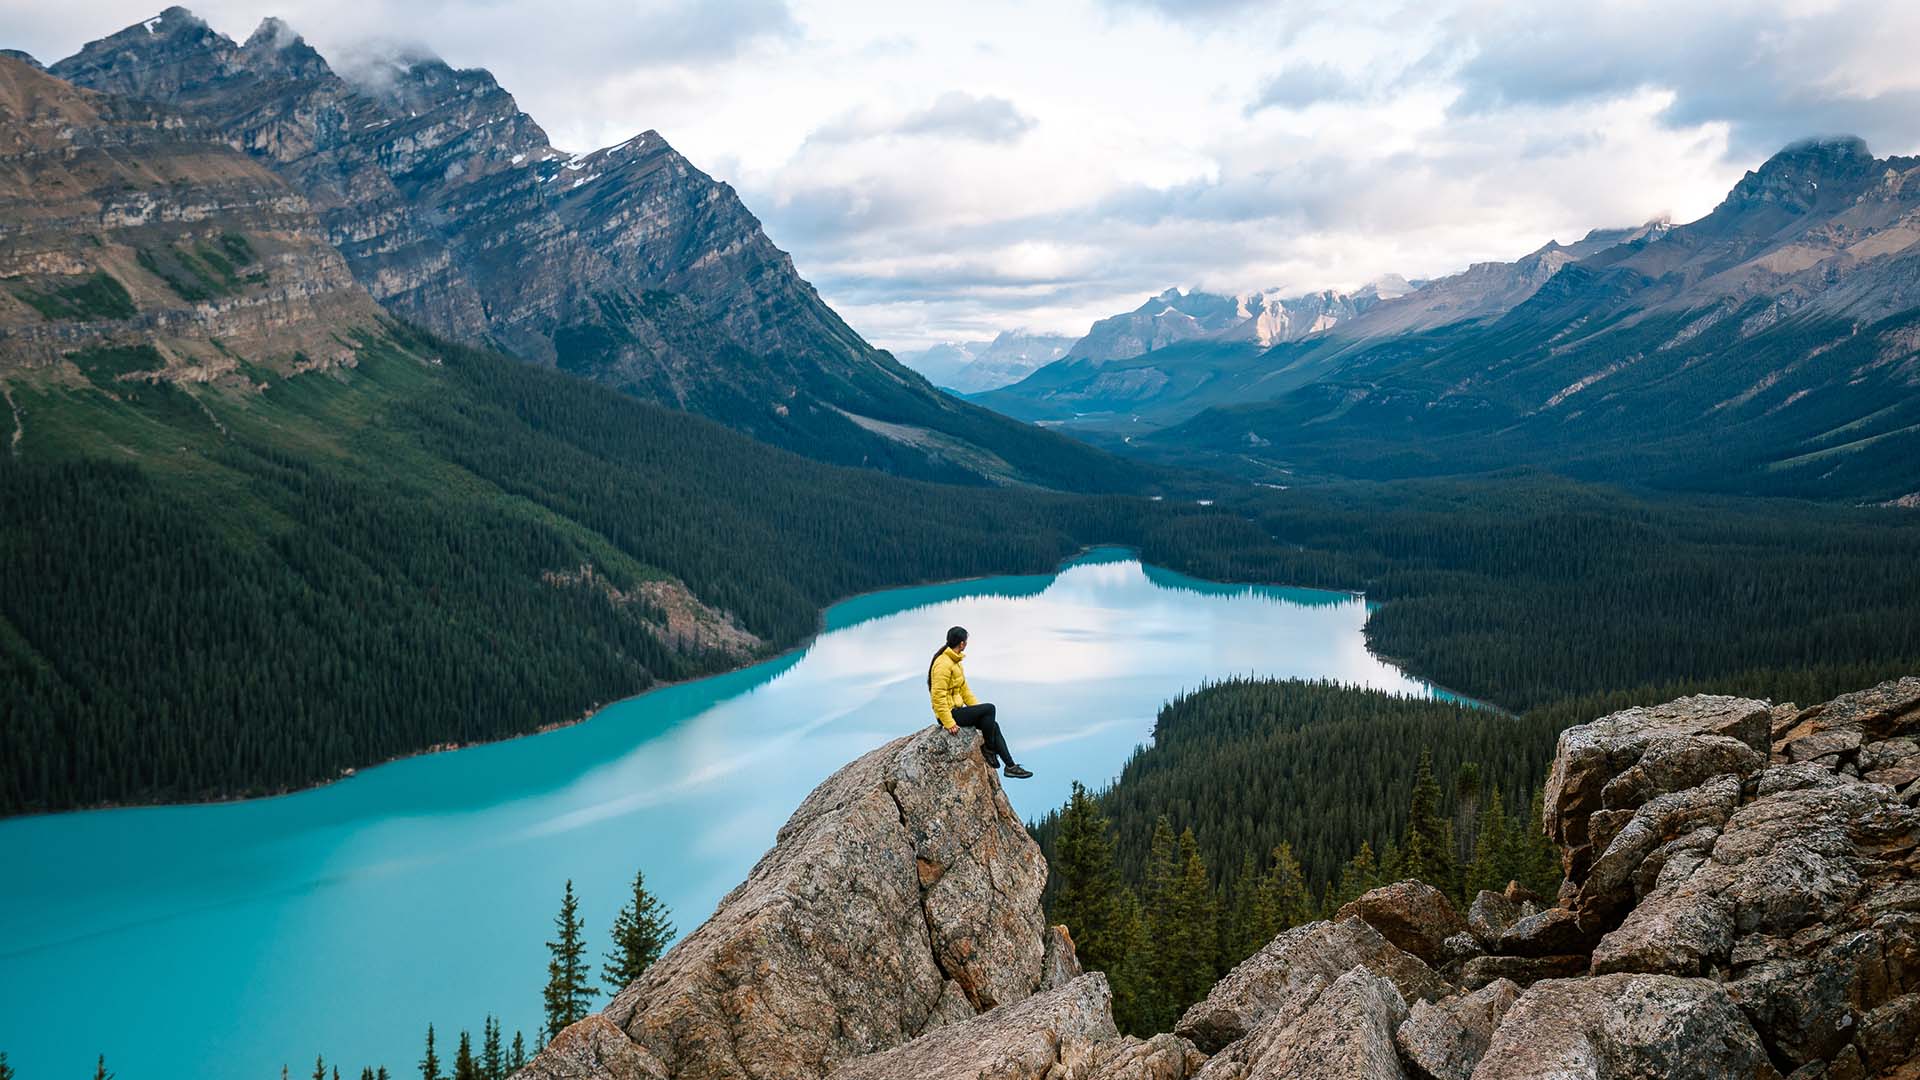 The author enjoys an early morning view of Peyto Lake in Banff National Park.